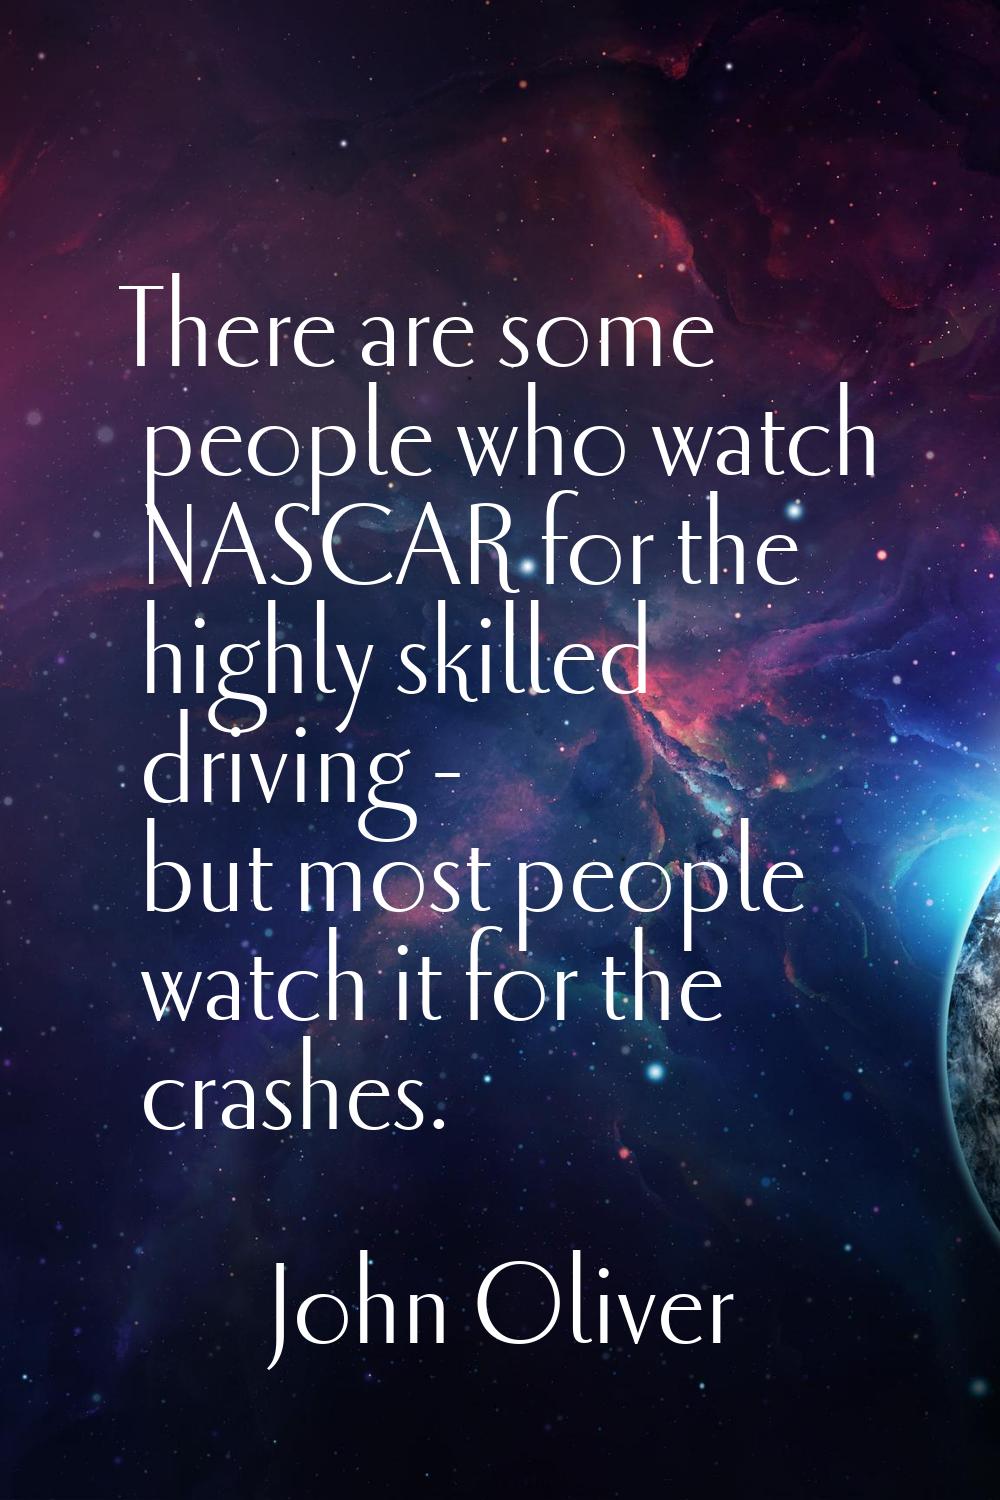 There are some people who watch NASCAR for the highly skilled driving - but most people watch it fo